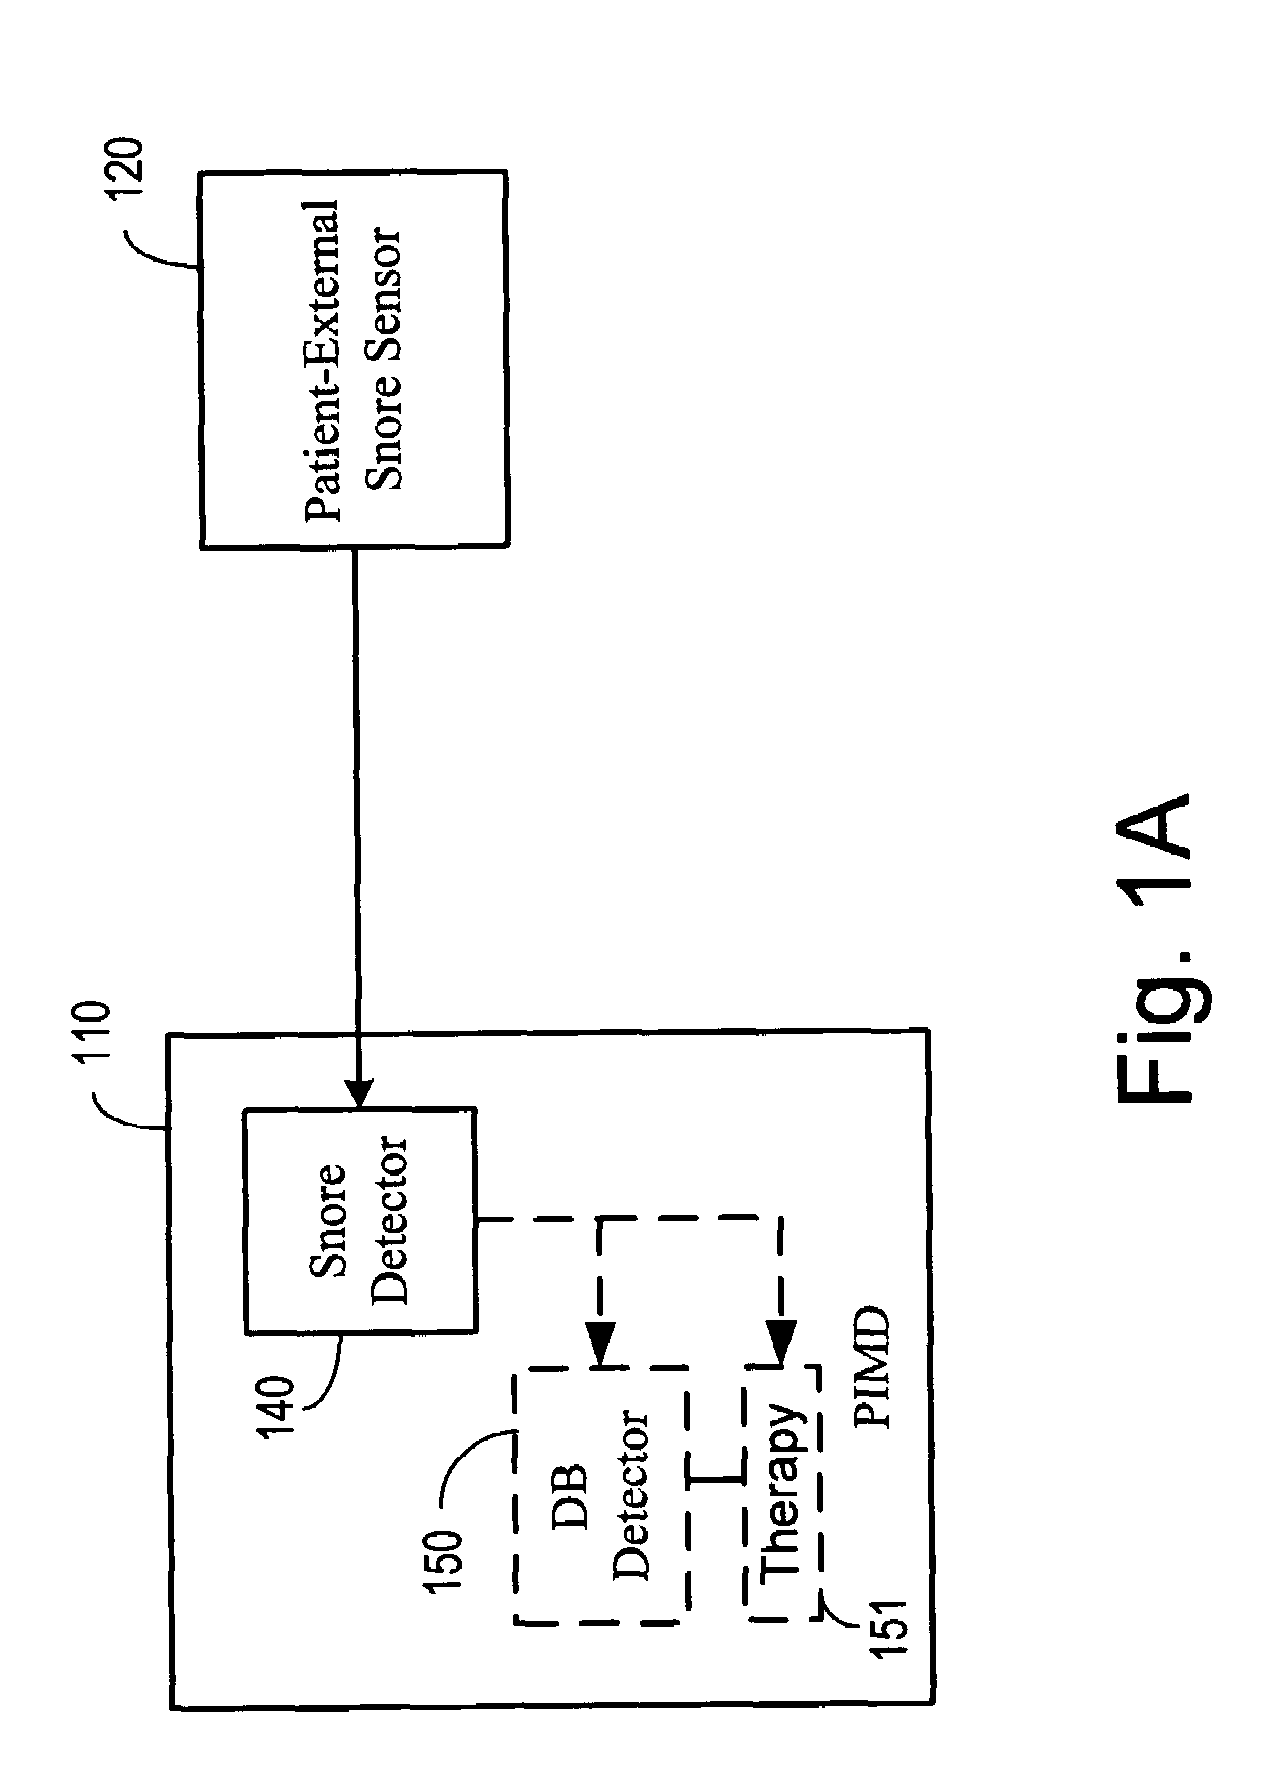 Snoring detection system and method